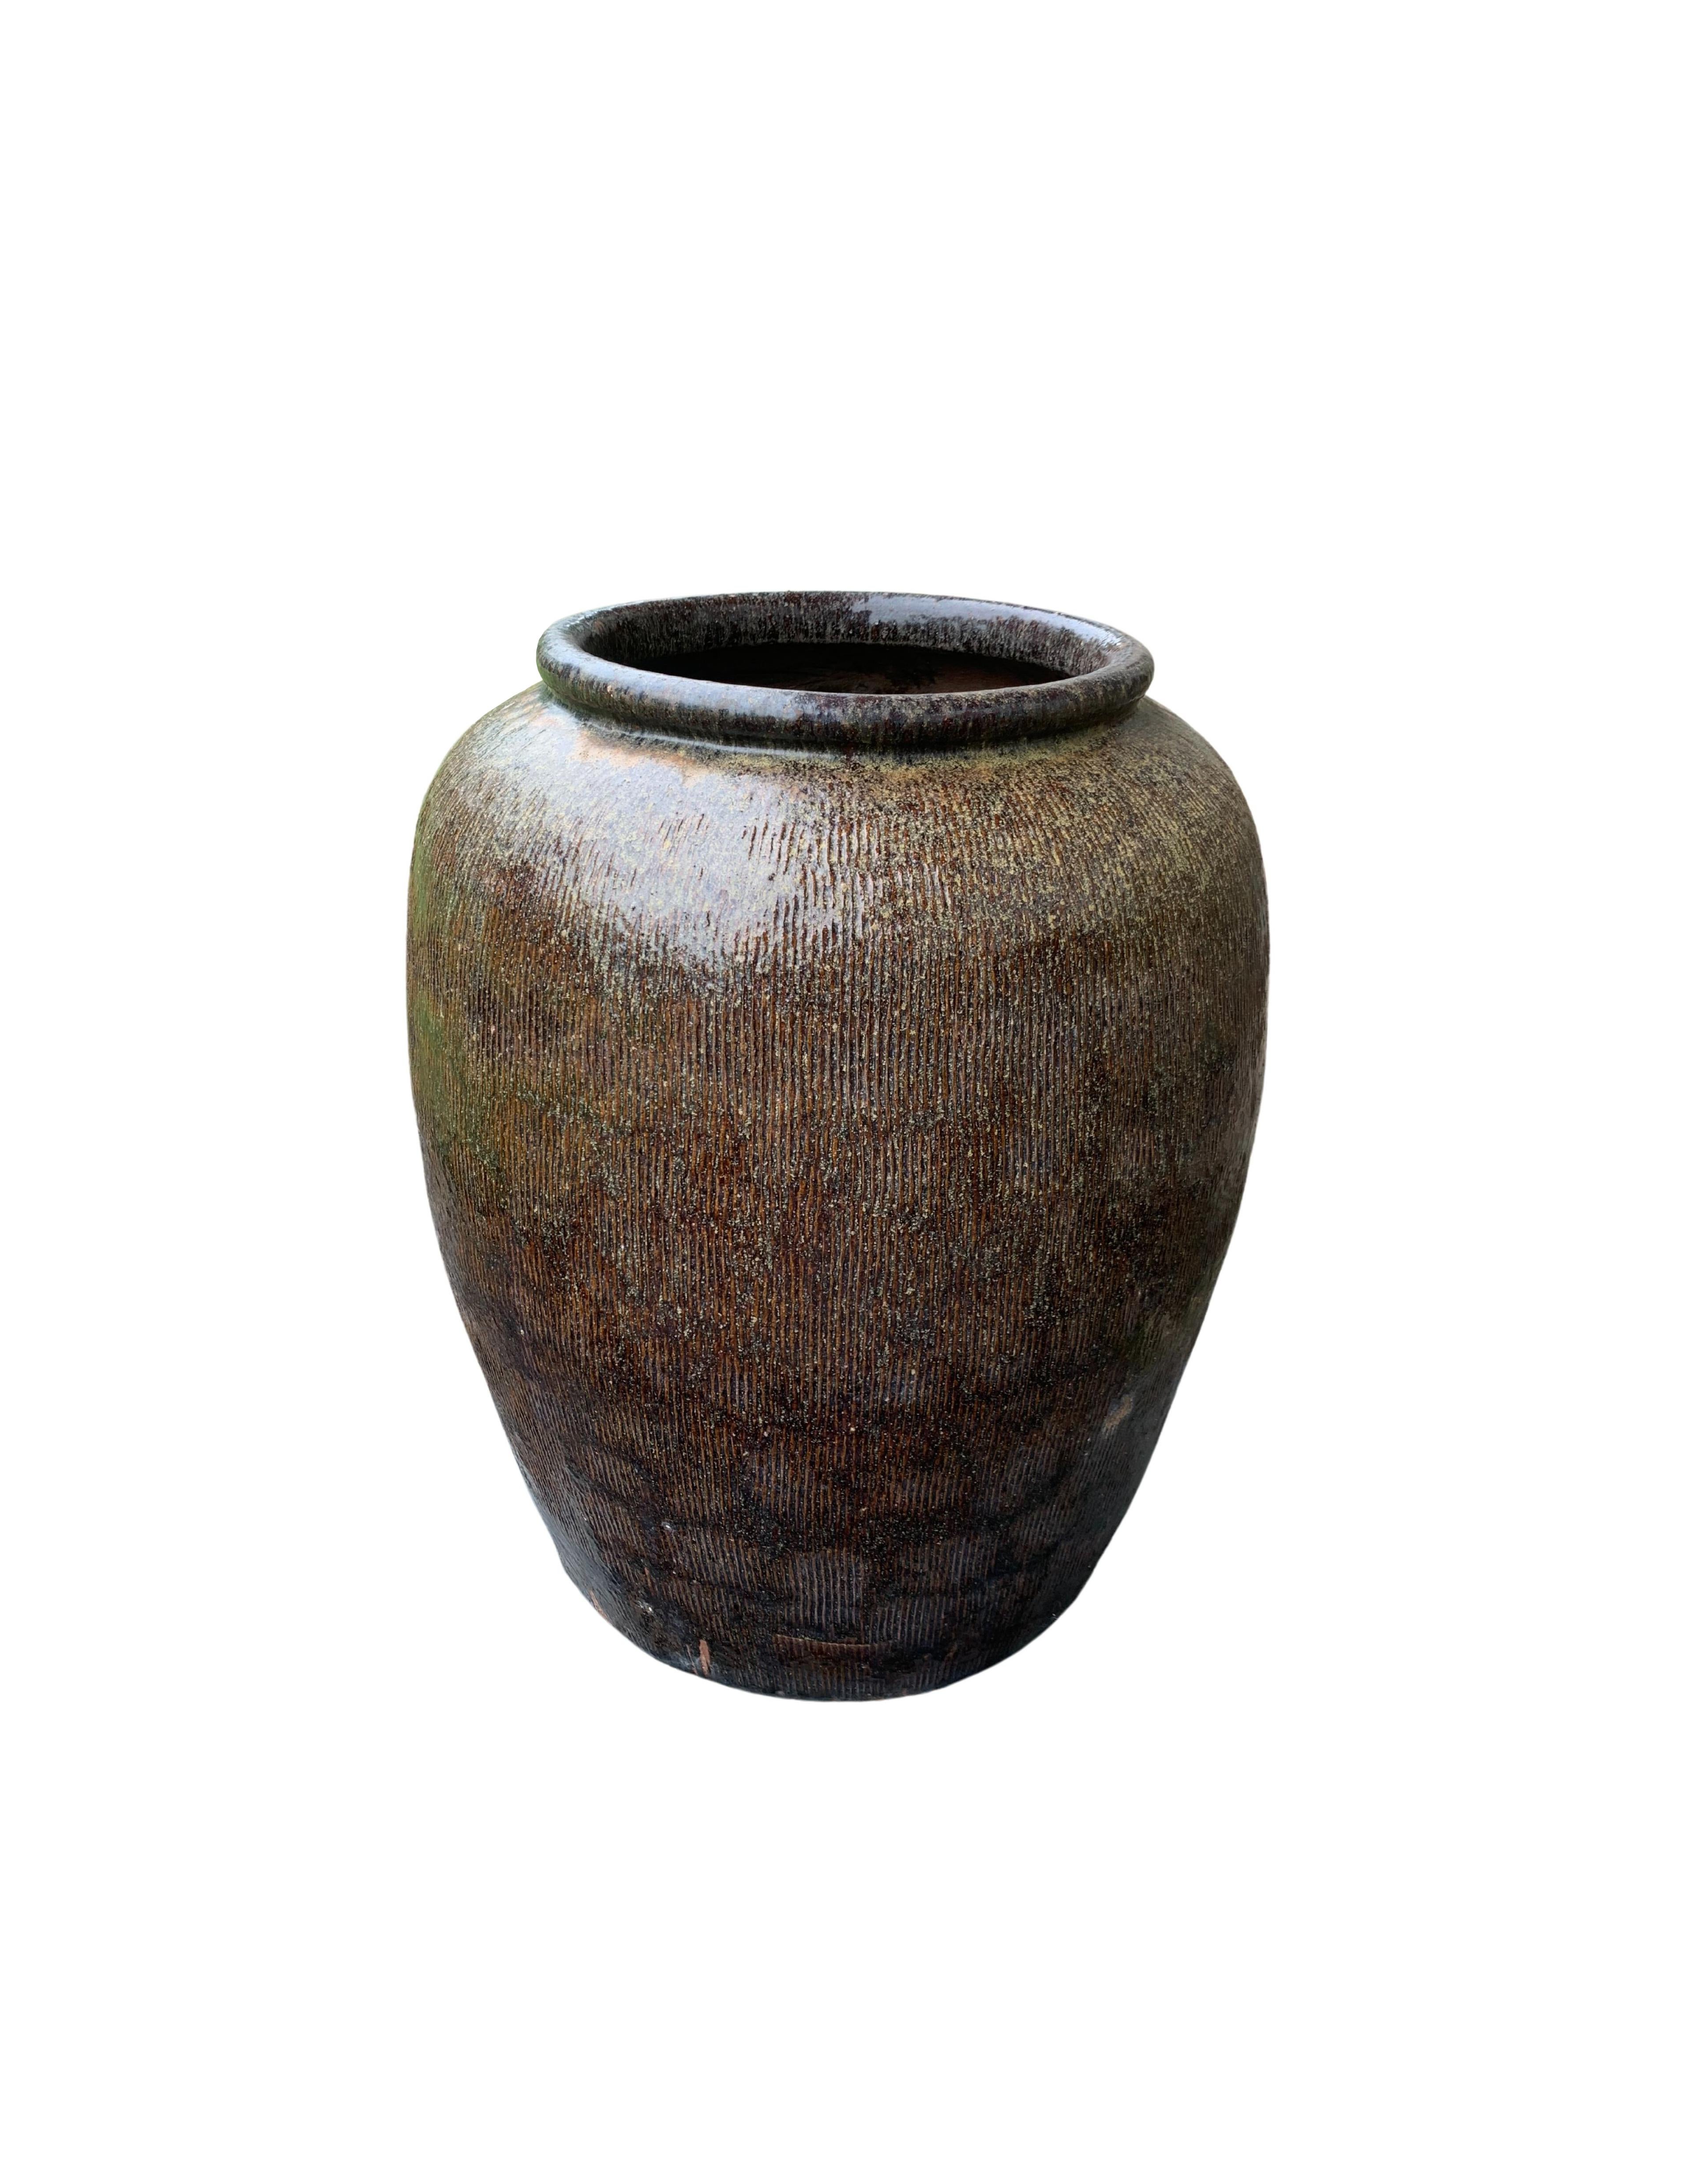 This glazed Chinese ceramic jar from the turn of the 19th Century was once used for soy sauce production. It features a brown finish and outer surface that features a ribbed texture. A great example of Chinese pottery, with its imperfections and